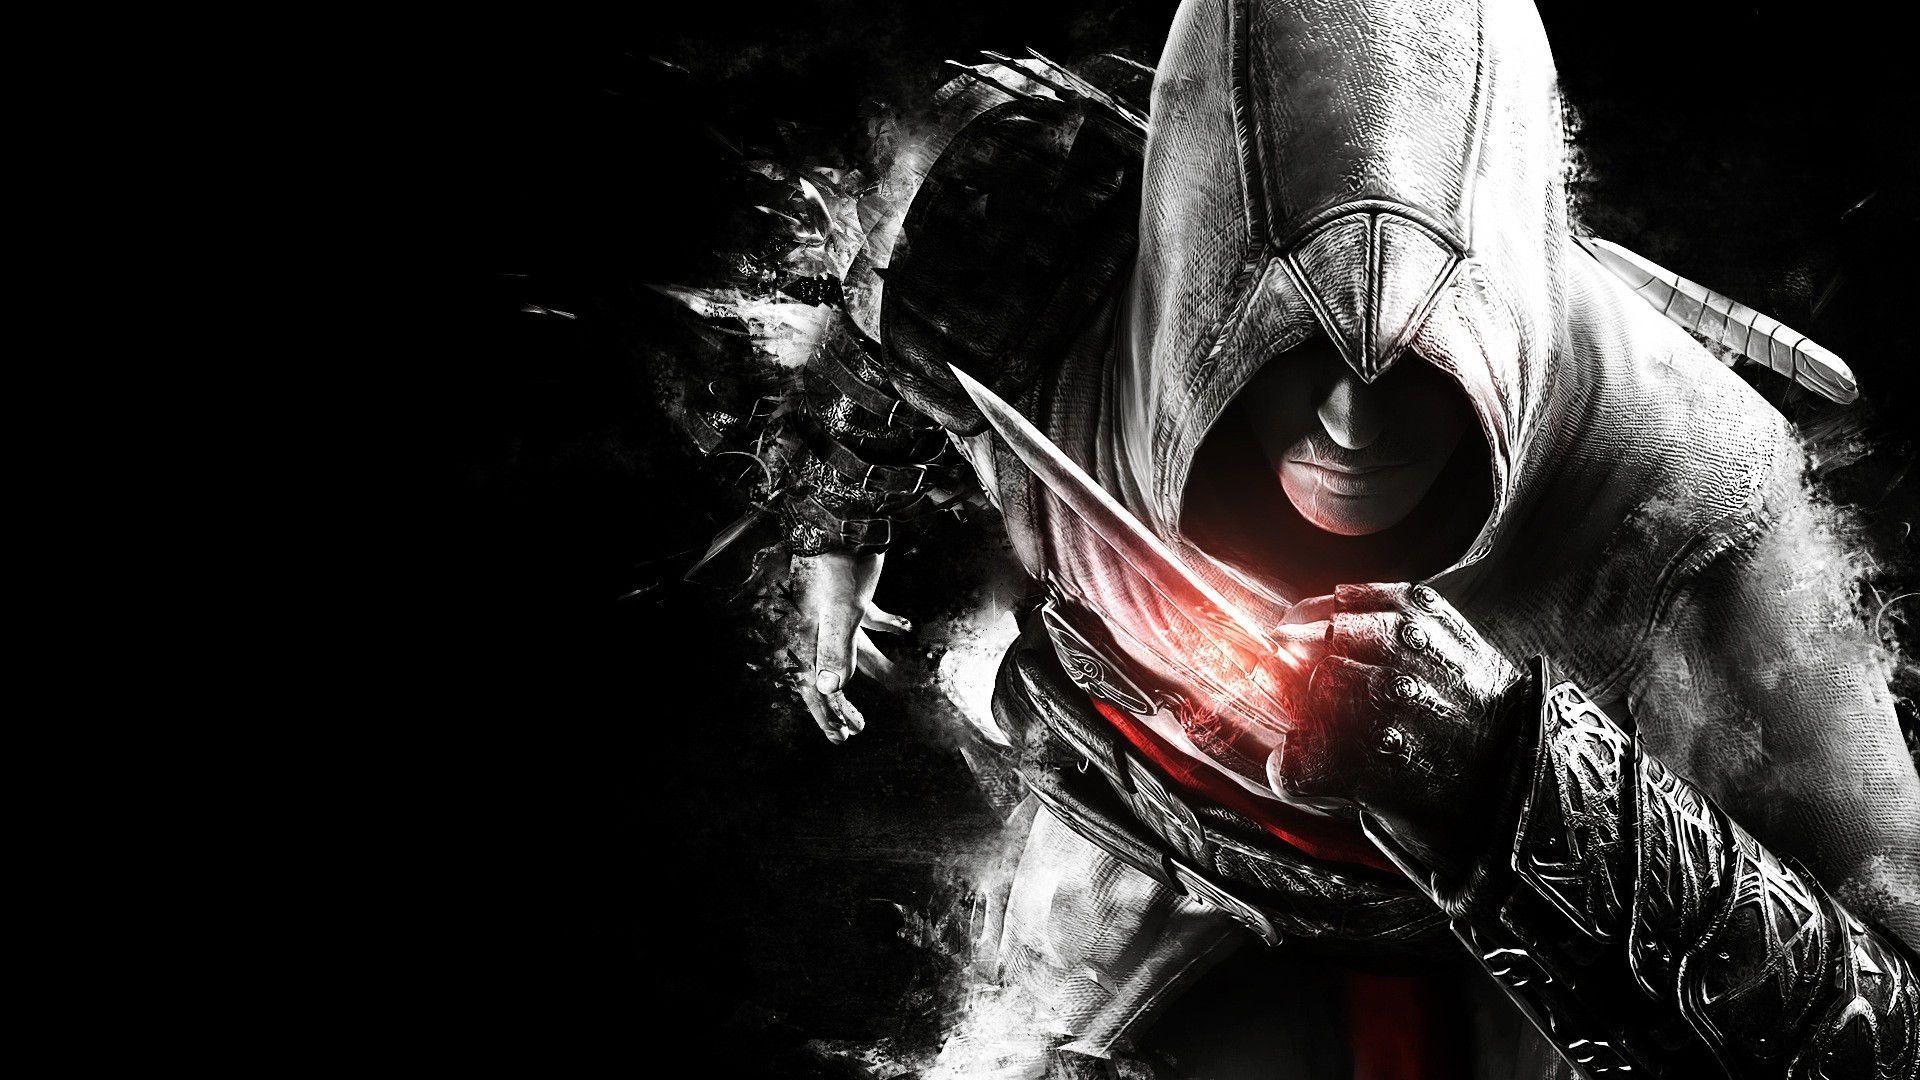 WallPapers. Assassins creed